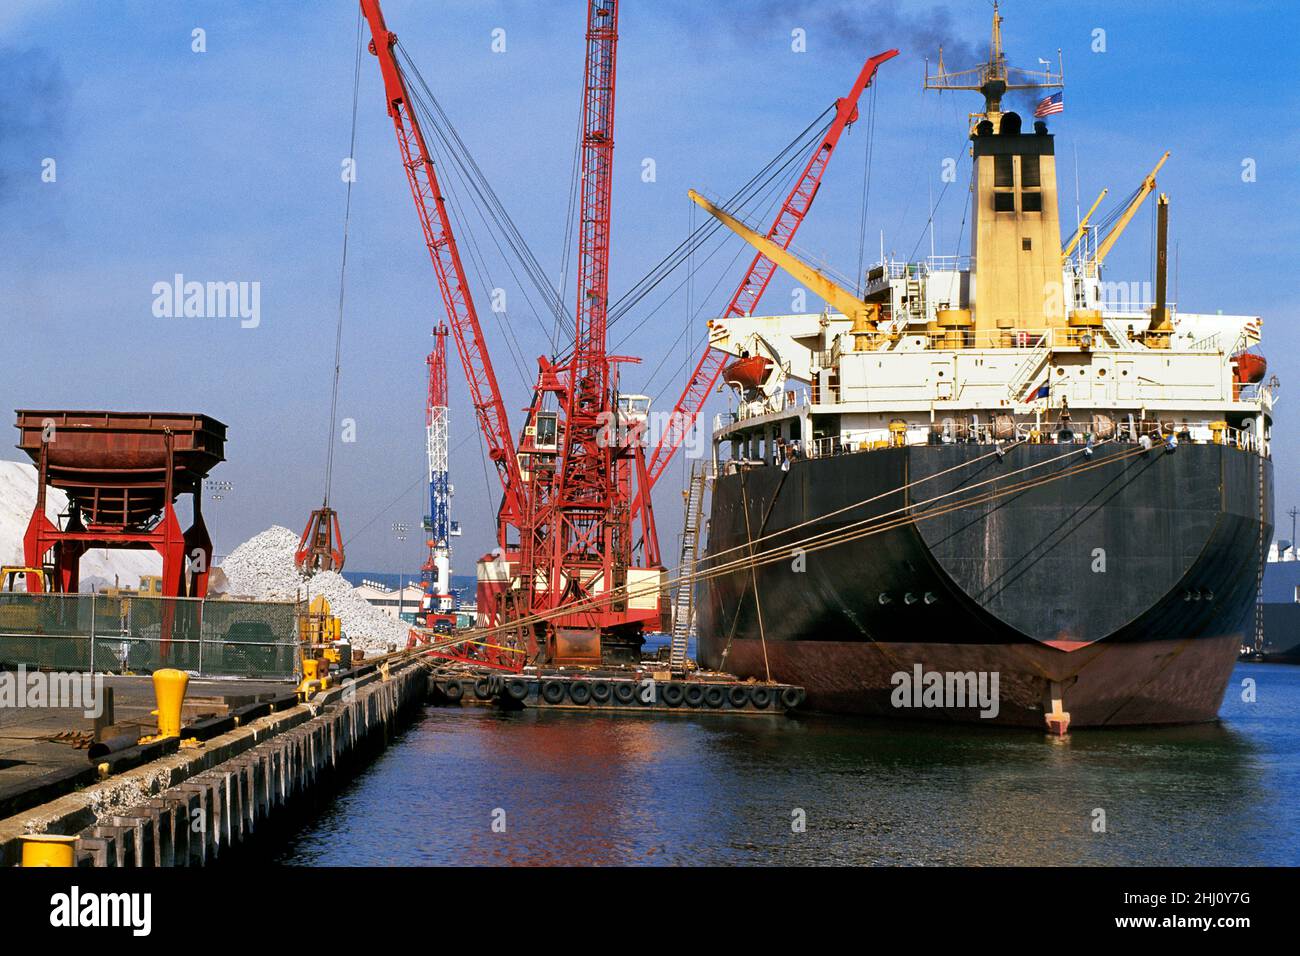 Cargo ship in harbor (harbour). Industrial port loading cranes transferring crude ore for shipment. Infrastructure Port Elizabeth, Port Authority, USA Stock Photo